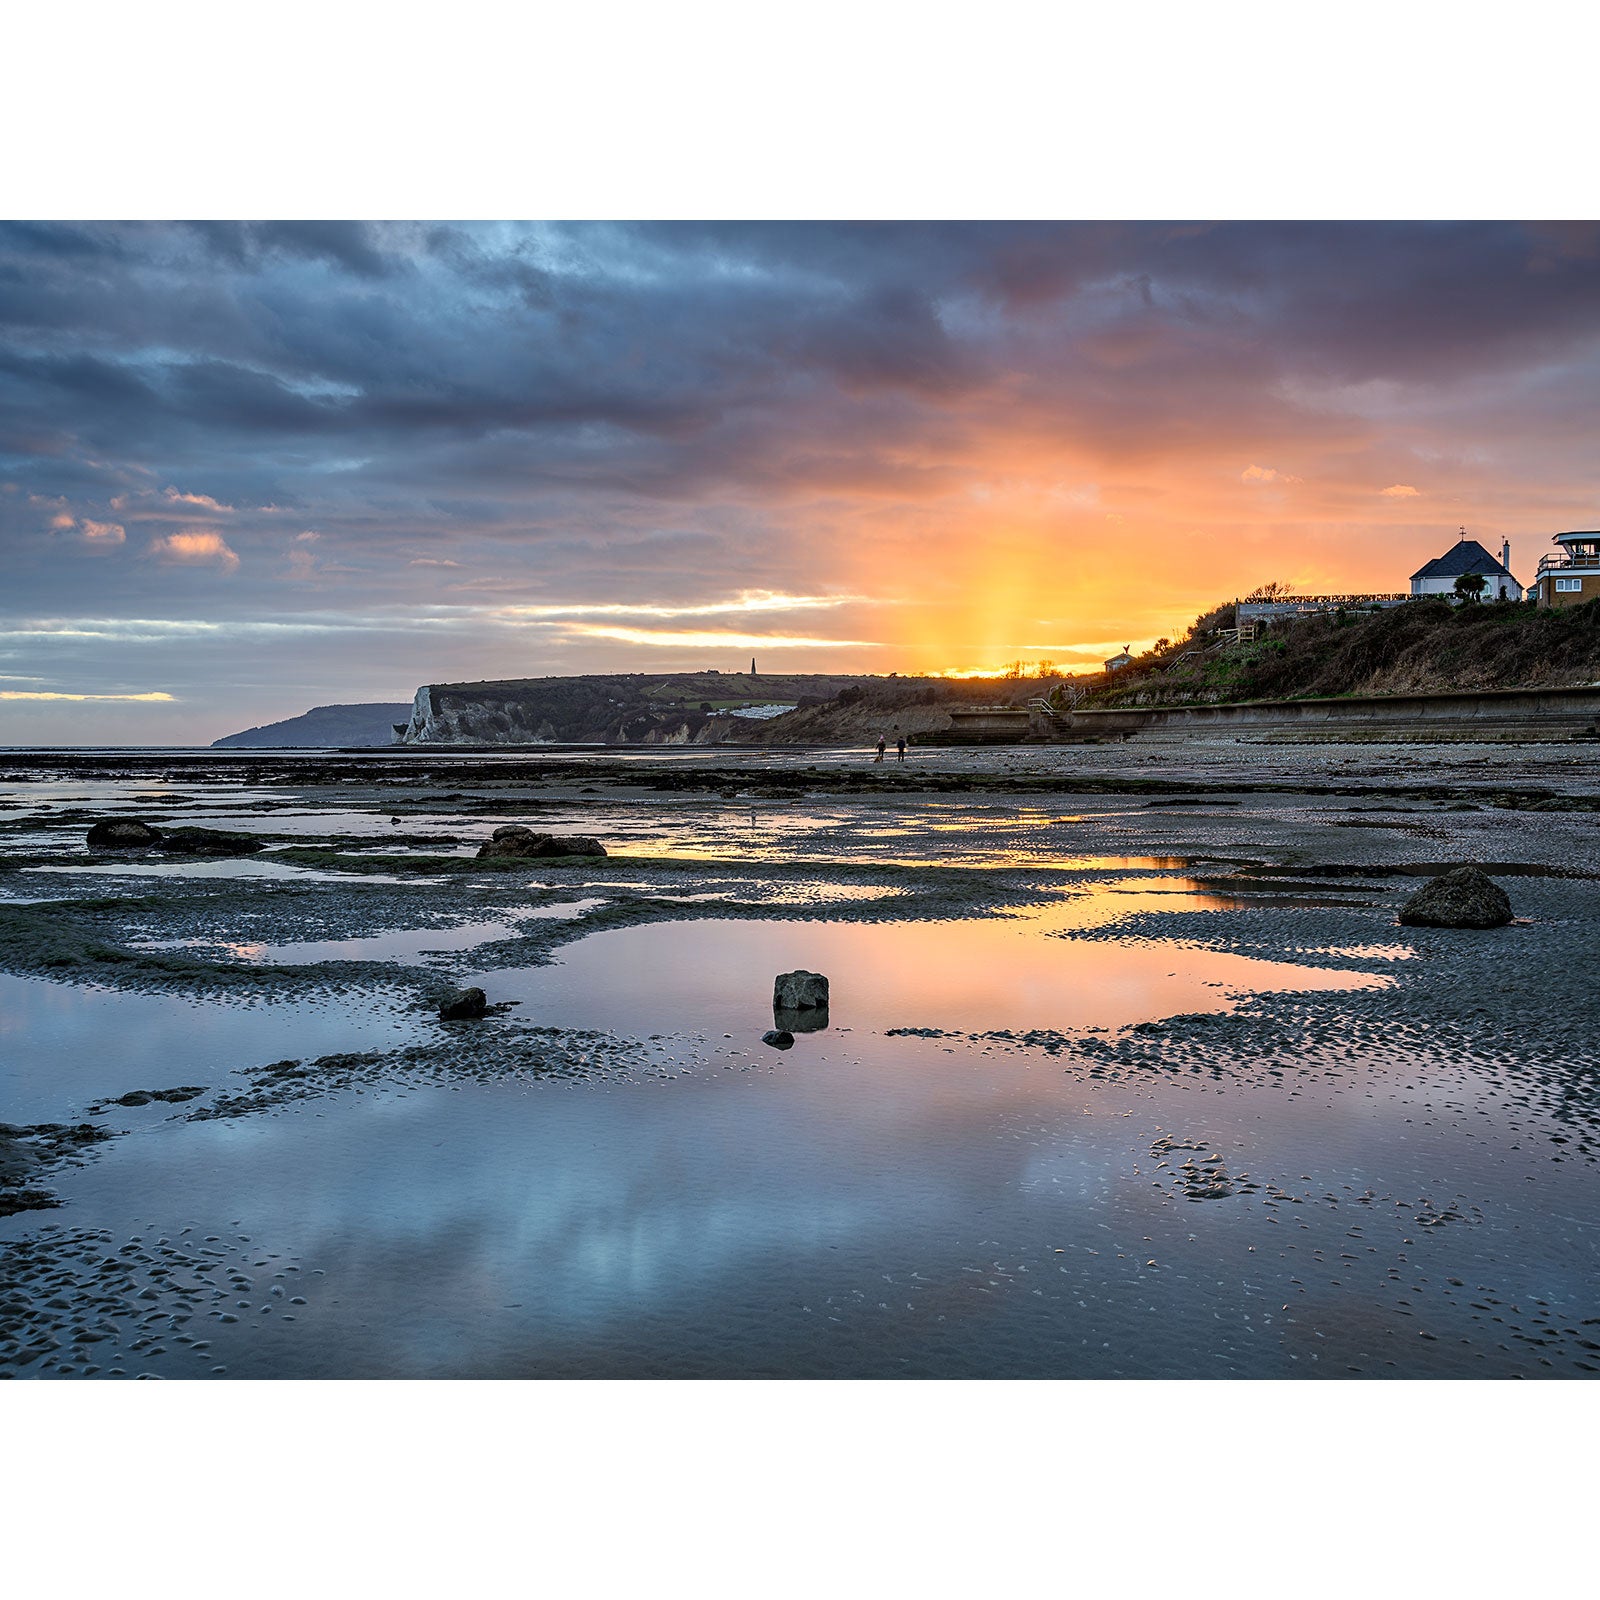 Sunset over the Whitecliff Bay coastal landscape with reflective tidal pools and a dramatic sky captured by Available Light Photography.